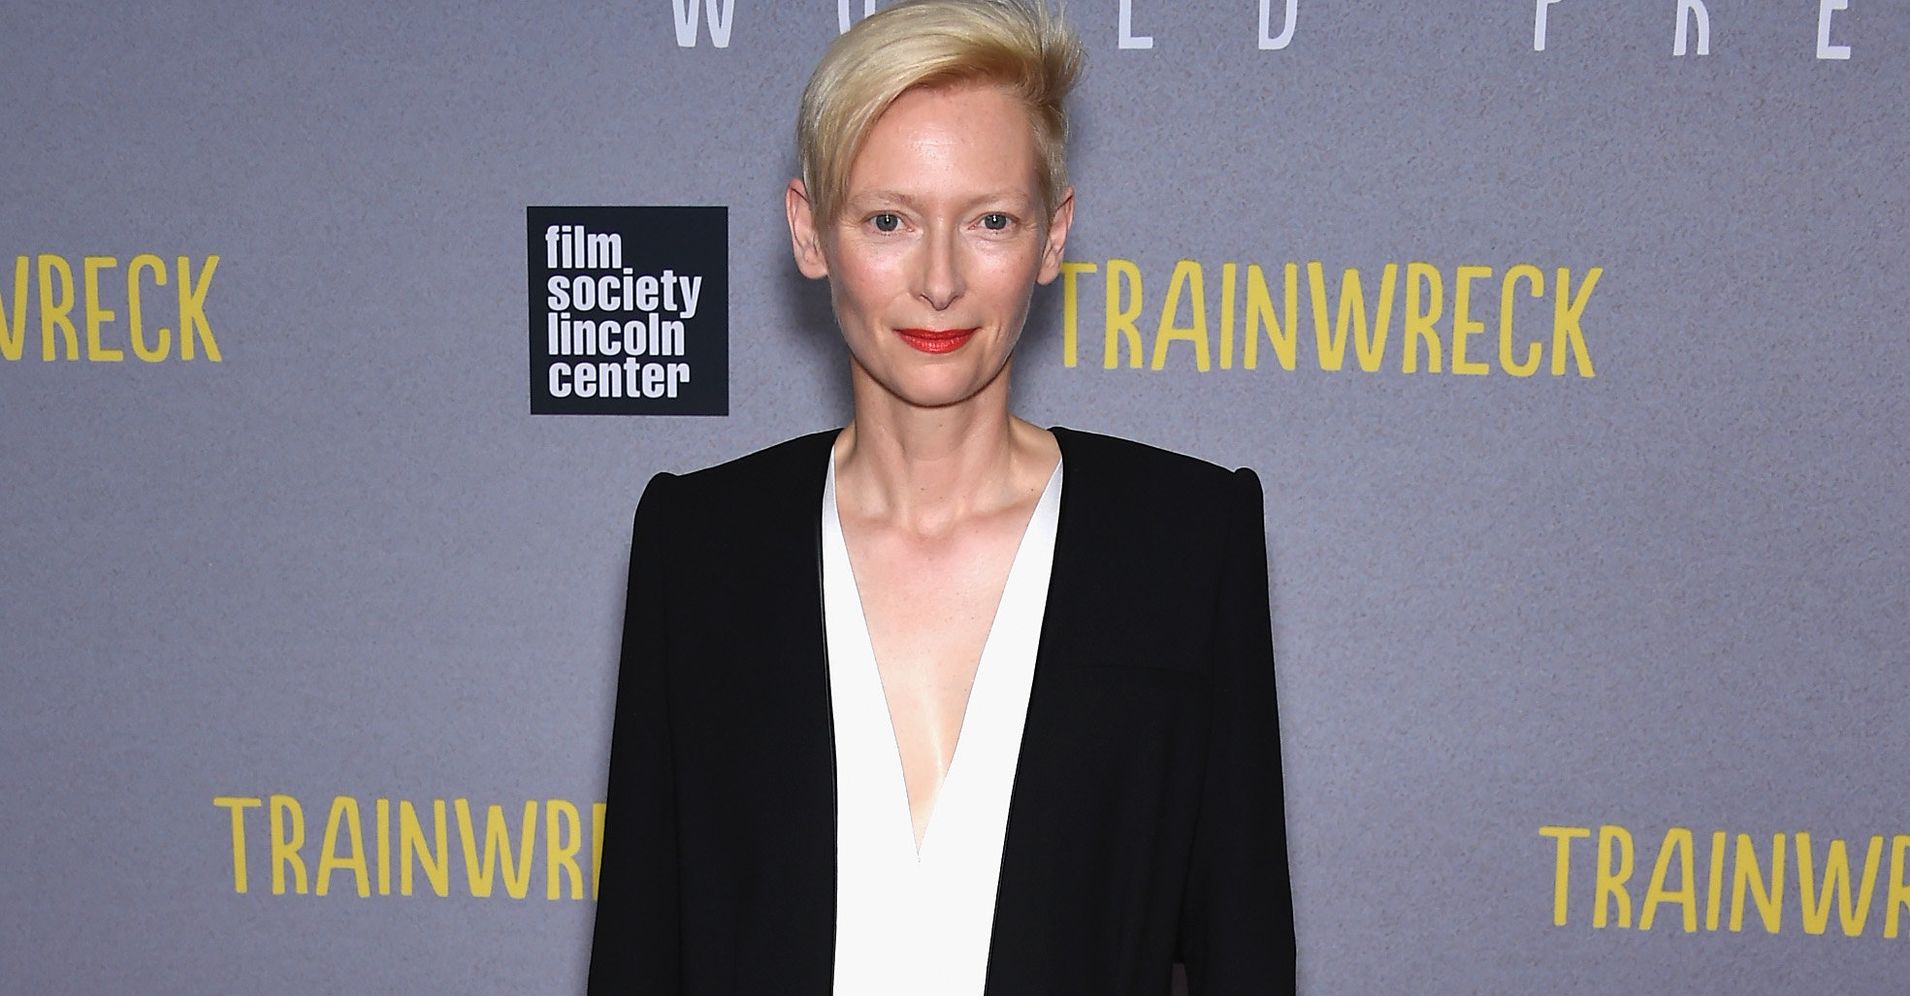 Tilda Swinton Is Delighted To Look Unrecognizable In Trainwreck And Play With Gender In